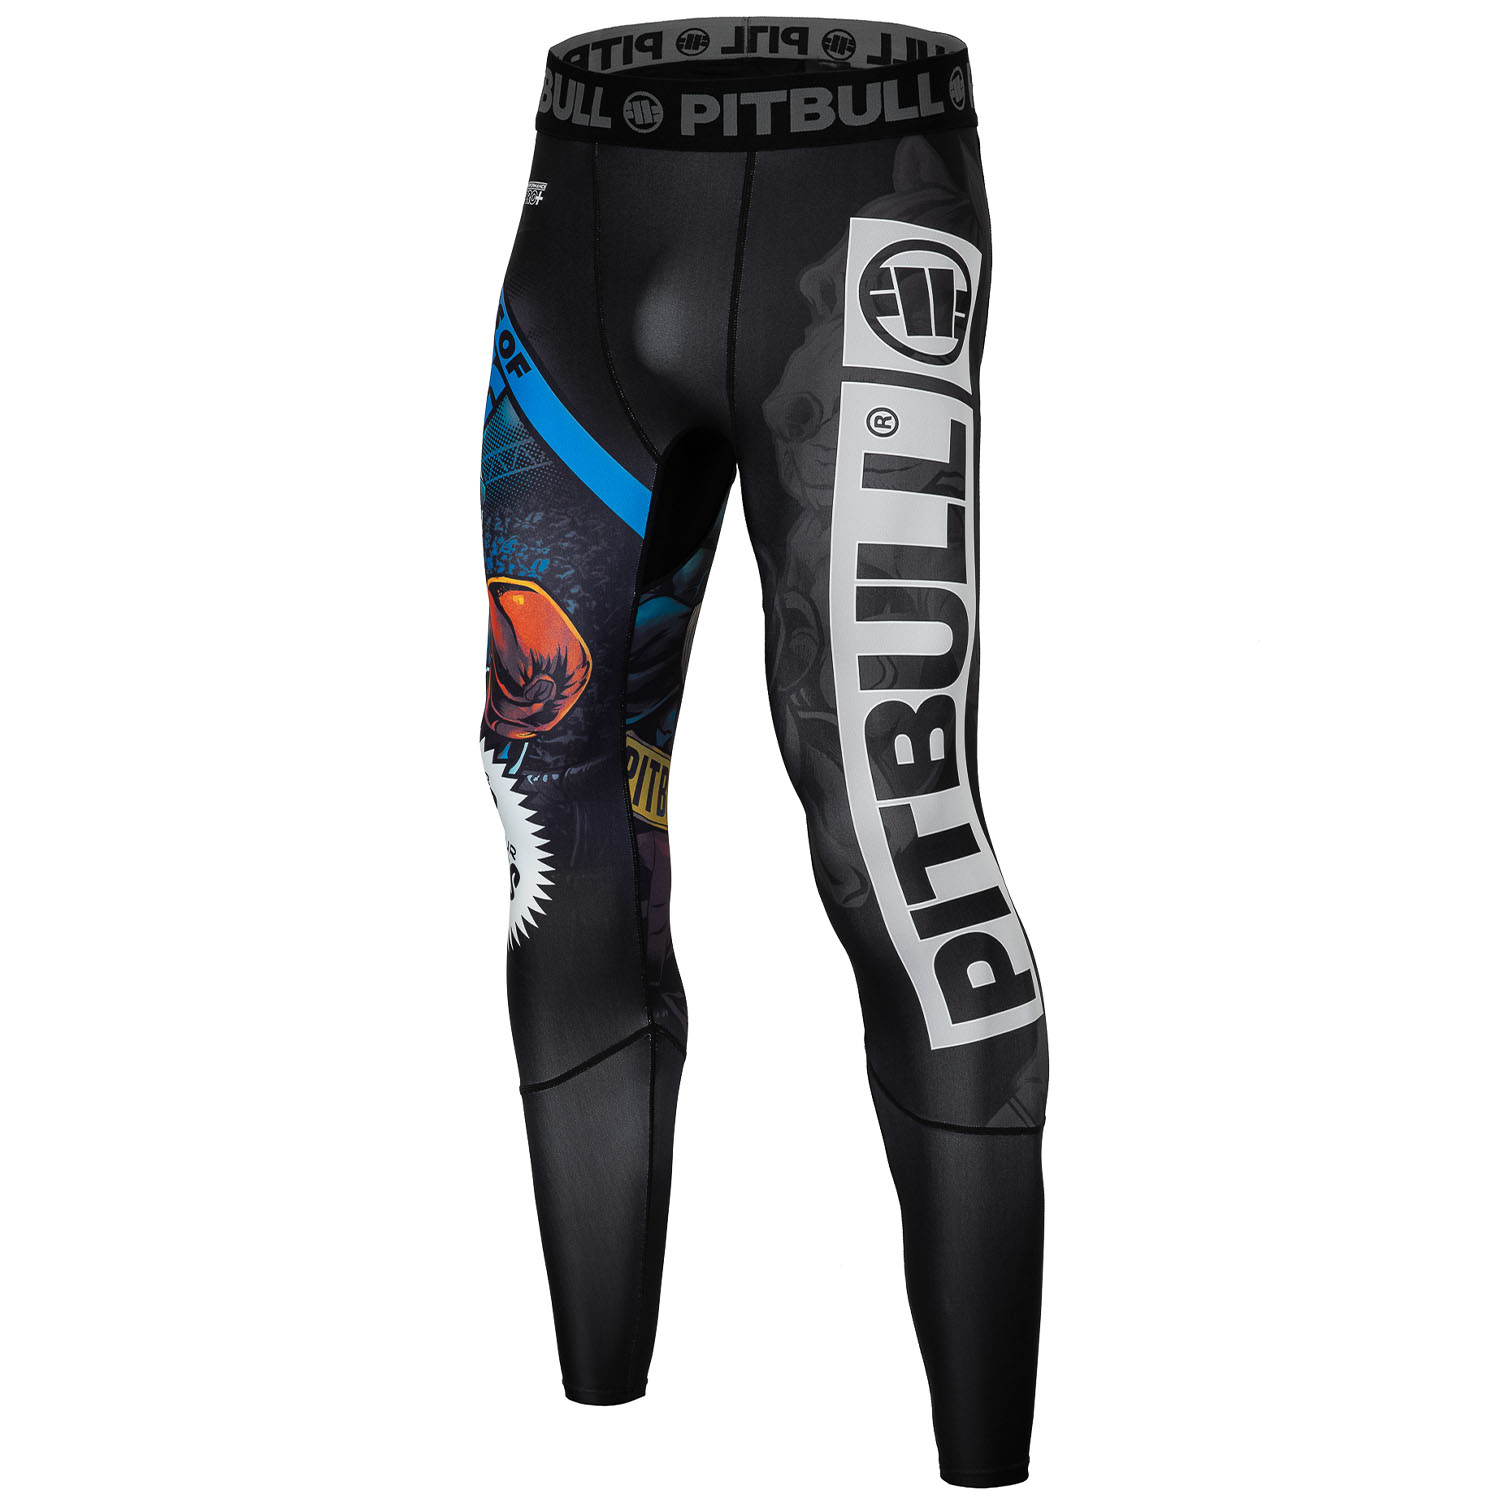 Pit Bull West Coast Compression Pants, Masters Of Boxing, schwarz, S